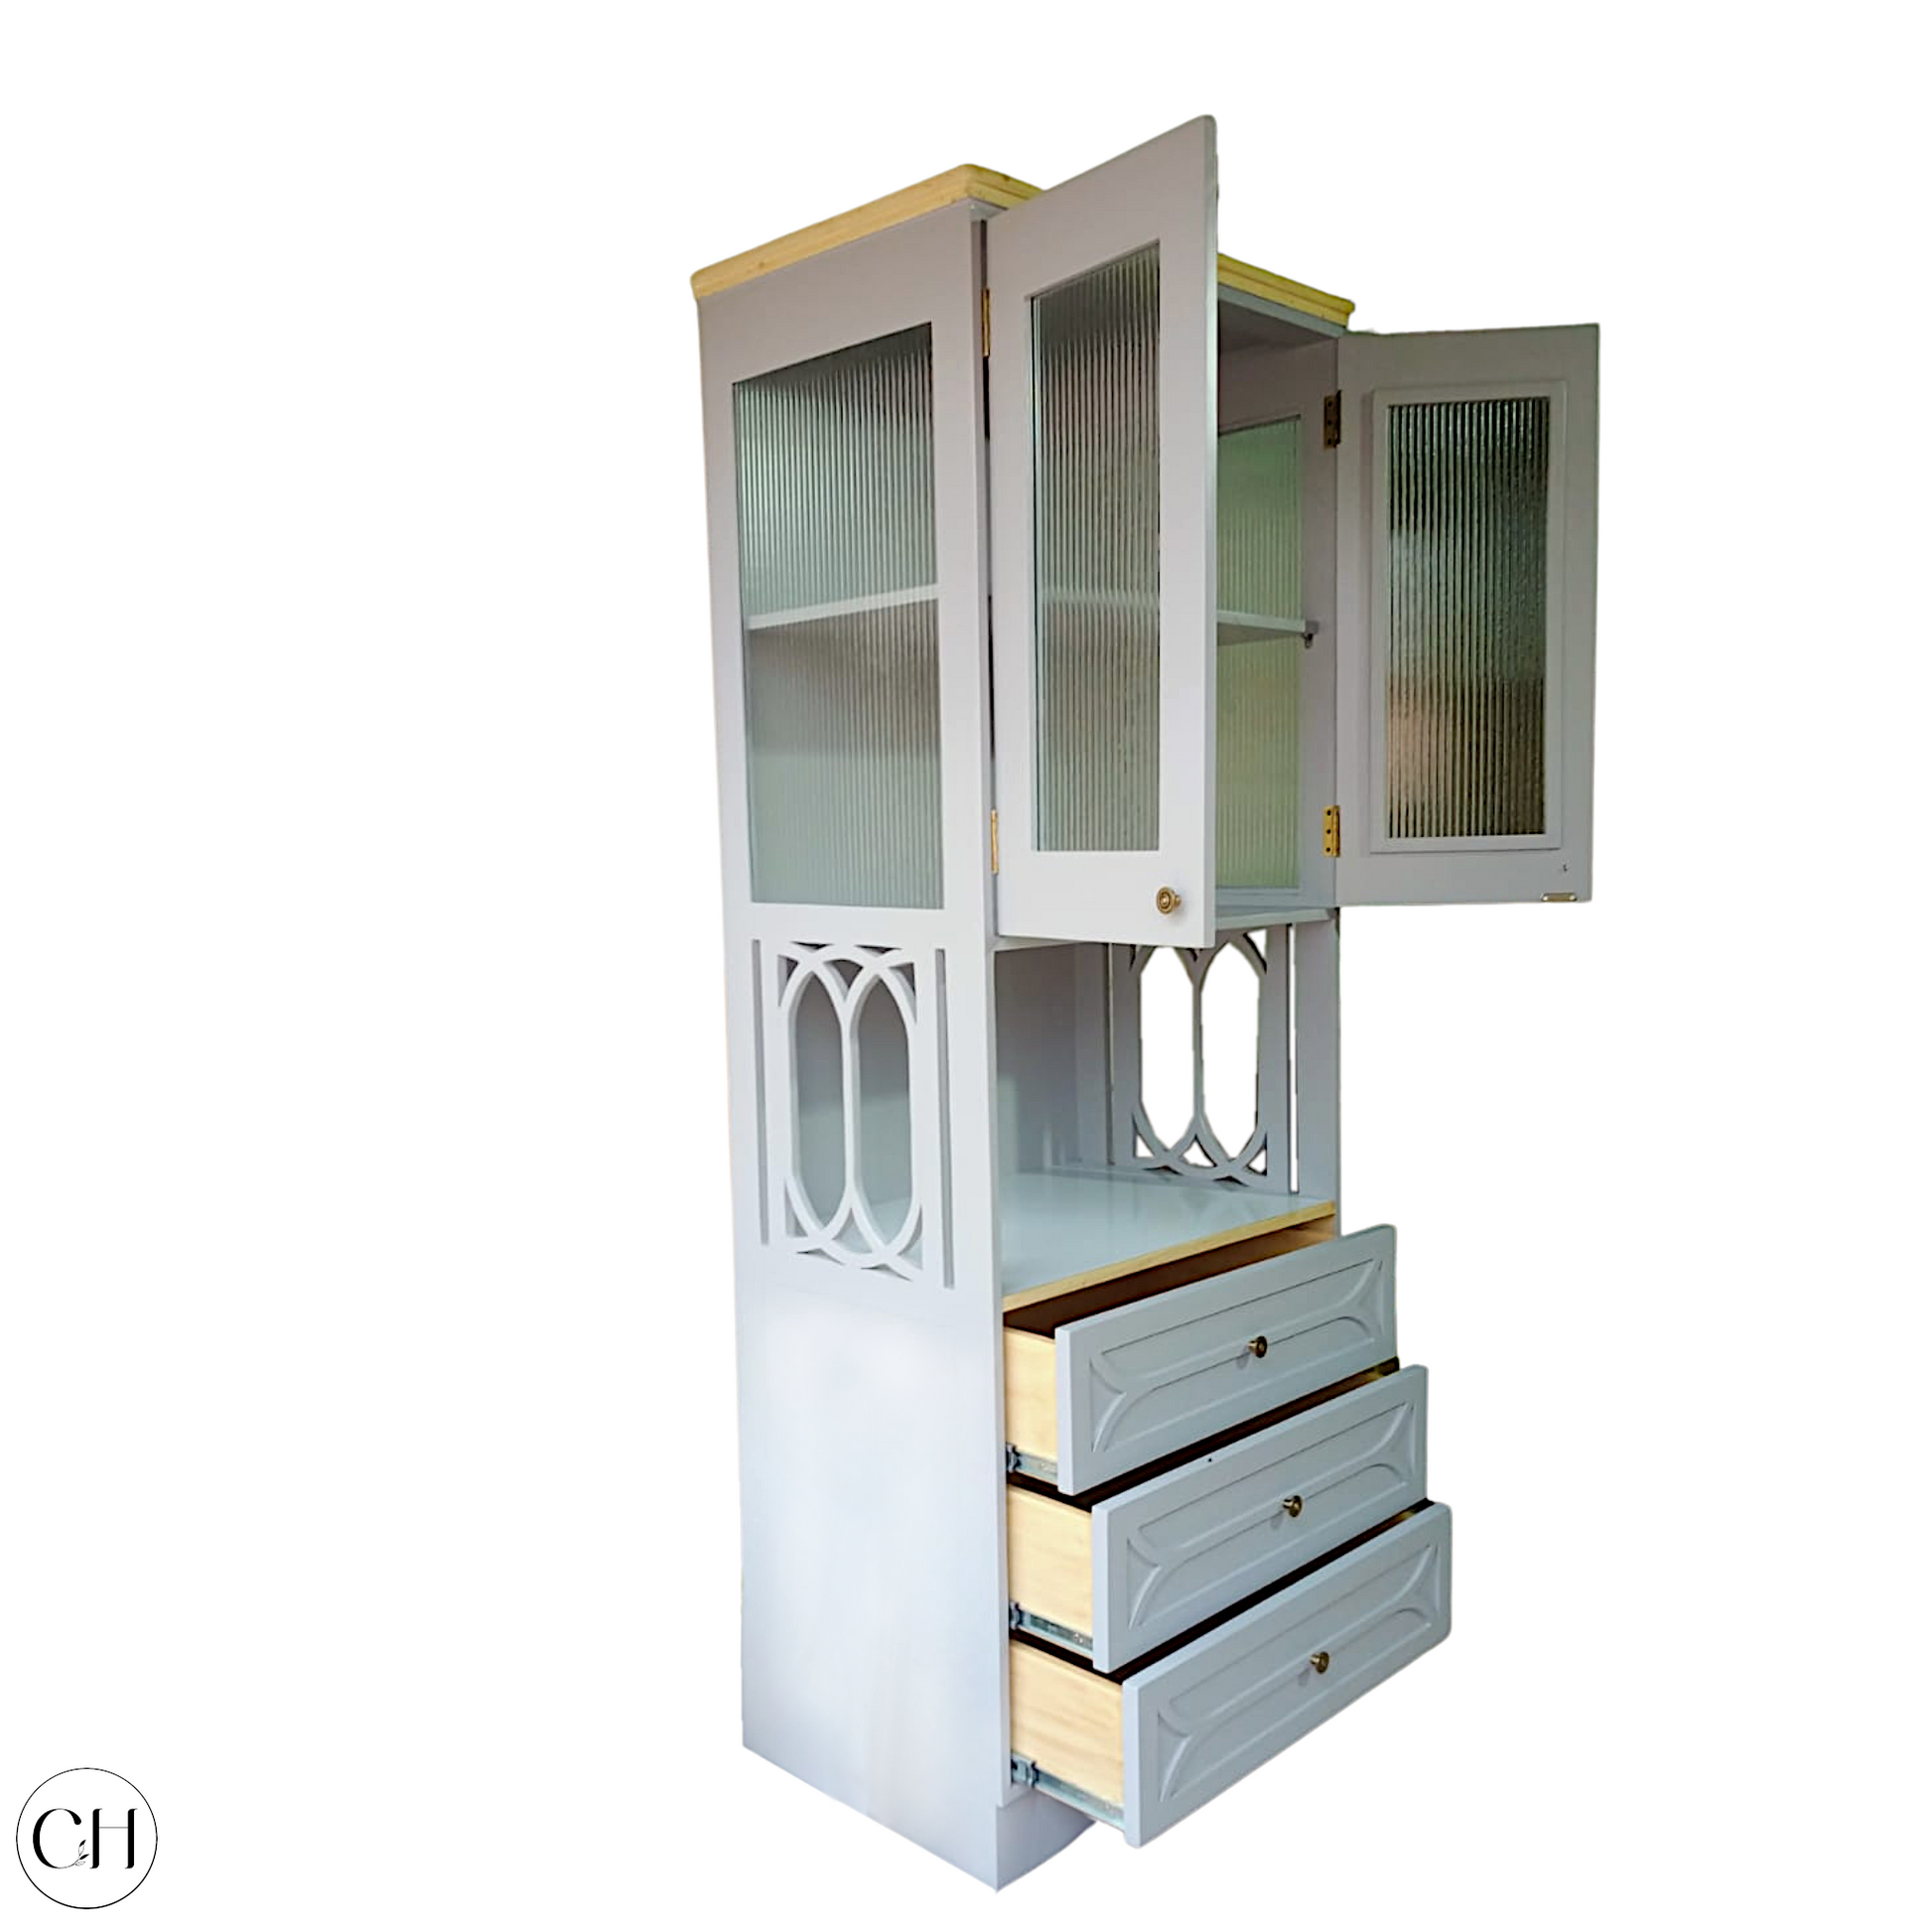 CustHum - Bookcase in duck-egg blue and pine finish, featuring fluted glass door cabinets, open space in the middle for printer, followed by three drawers (white background, doors and drawers open)